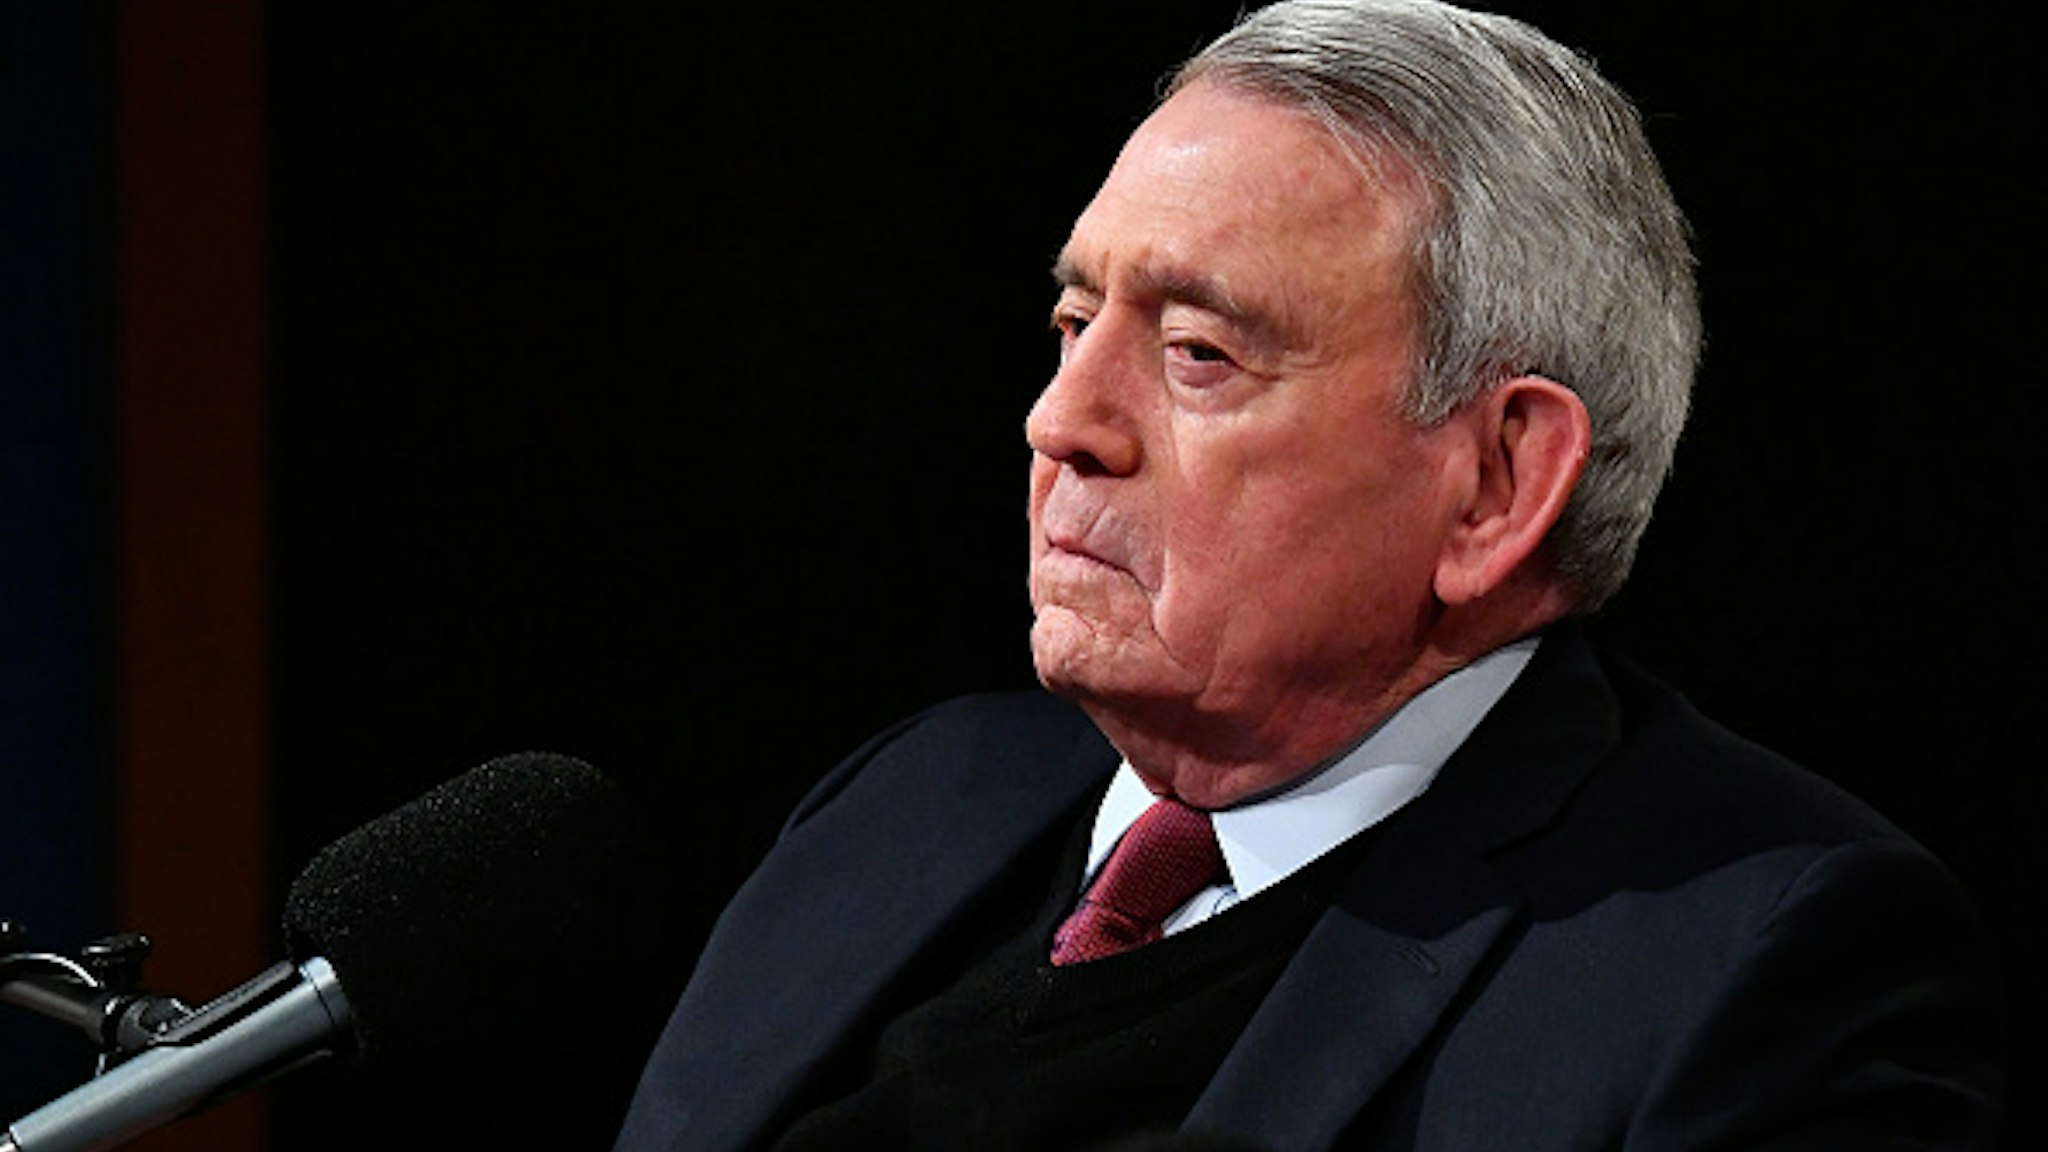 Dan Rather (pictured) hosts a SiriusXM Roundtable Special Event with Parkland, Florida, Marjory Stoneman Douglas High School Students